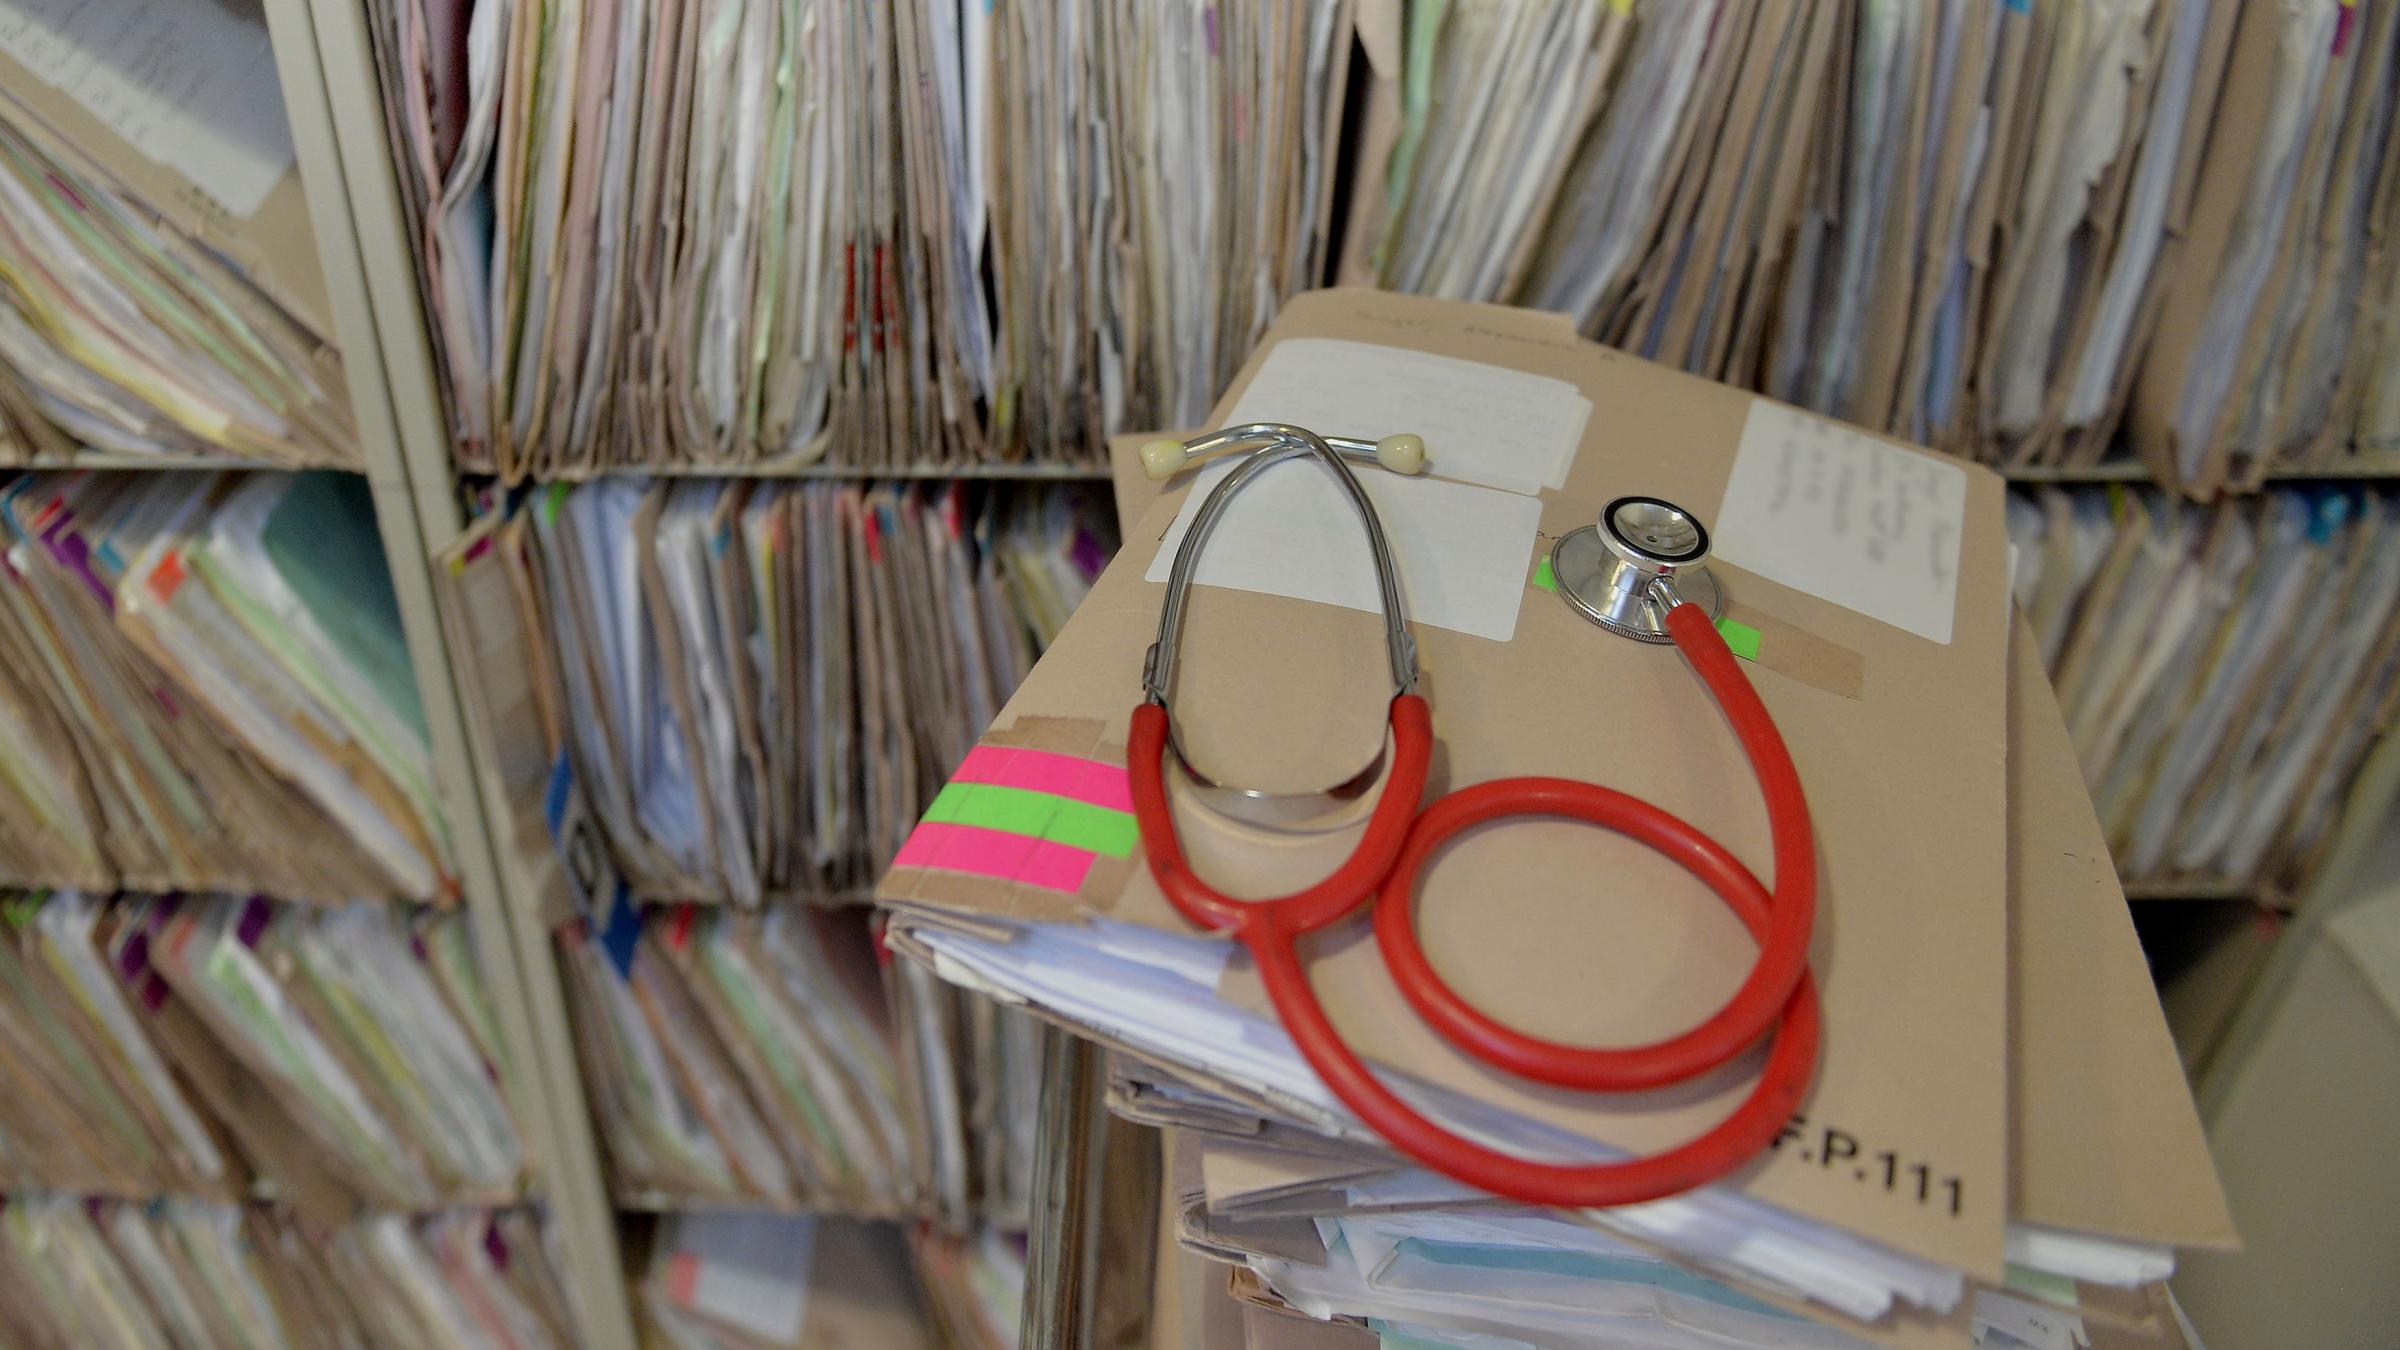 Patients' information left in warehouse for five years - St Helens Star